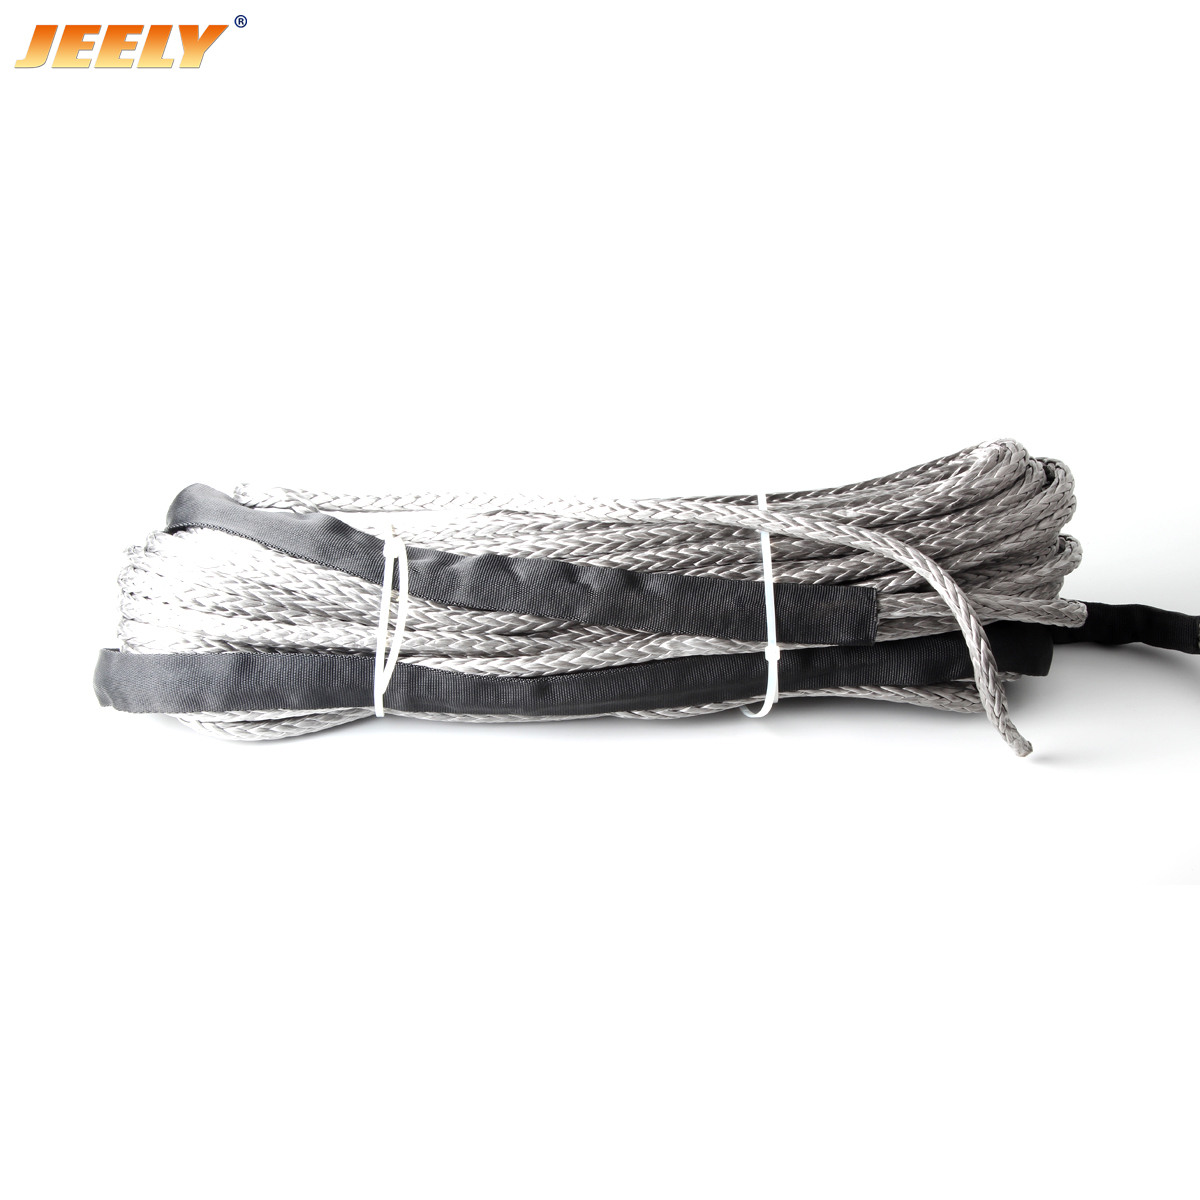 9mm*12m 3/8'' x 40' Synthetic Fiber UHMWPE Towing Winch Cord with thimble for ATV/UTV Winch Rope